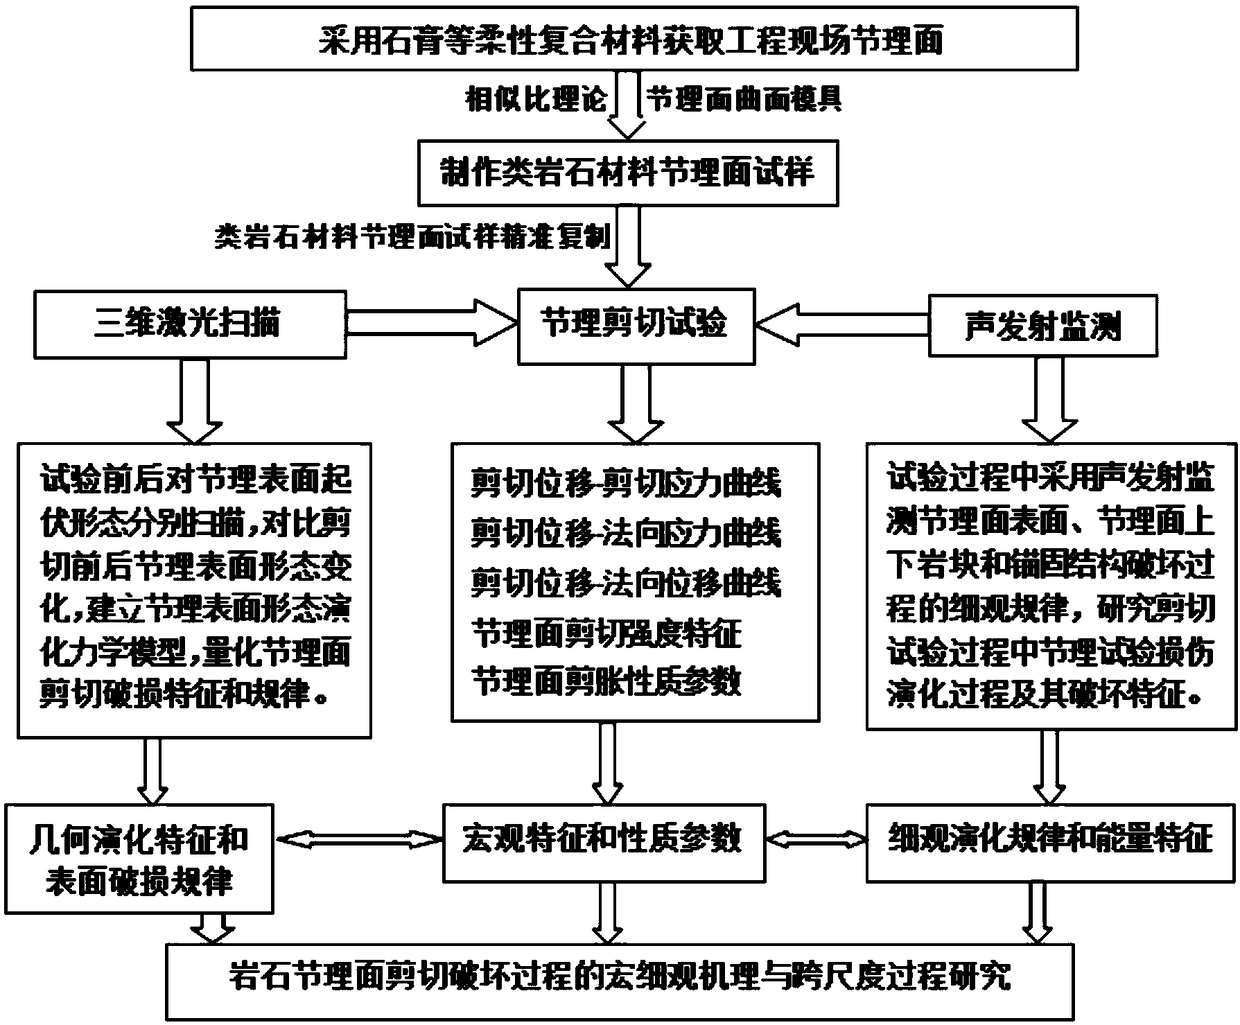 Analysis method for studying rock joint surface shearing damage process and test system